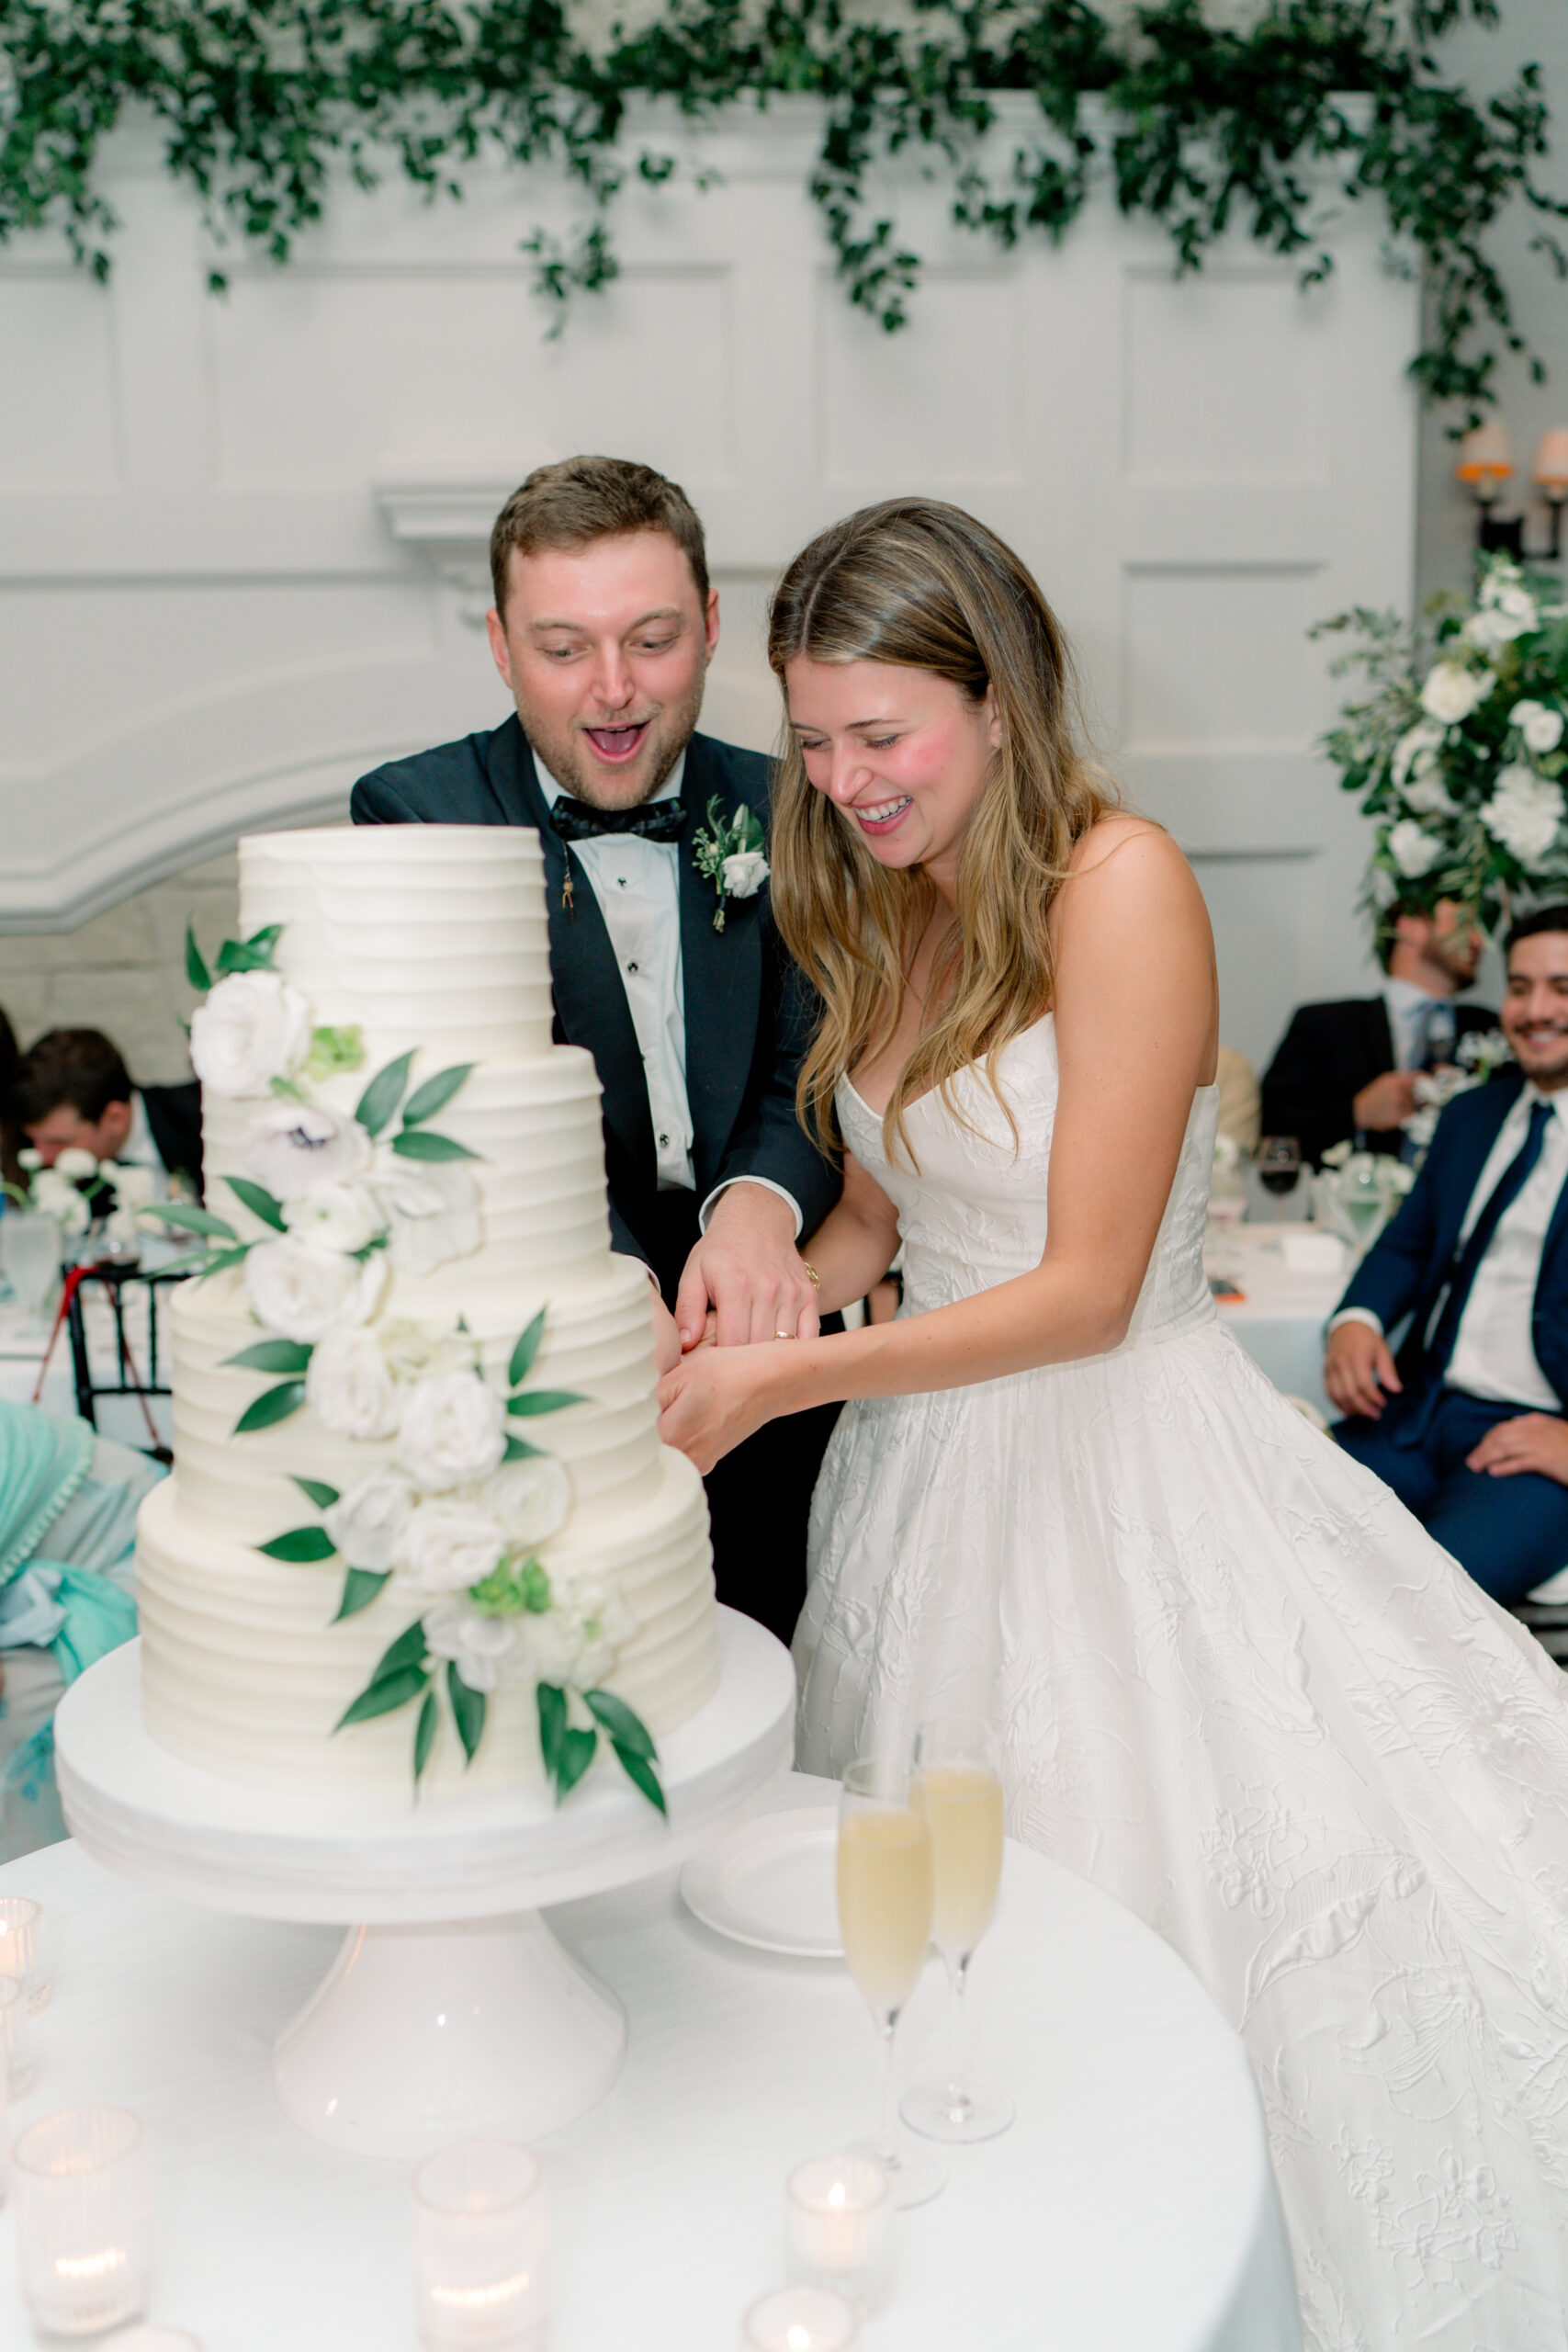 Bride and groom have fun with cutting the cake at their wedding reception. 